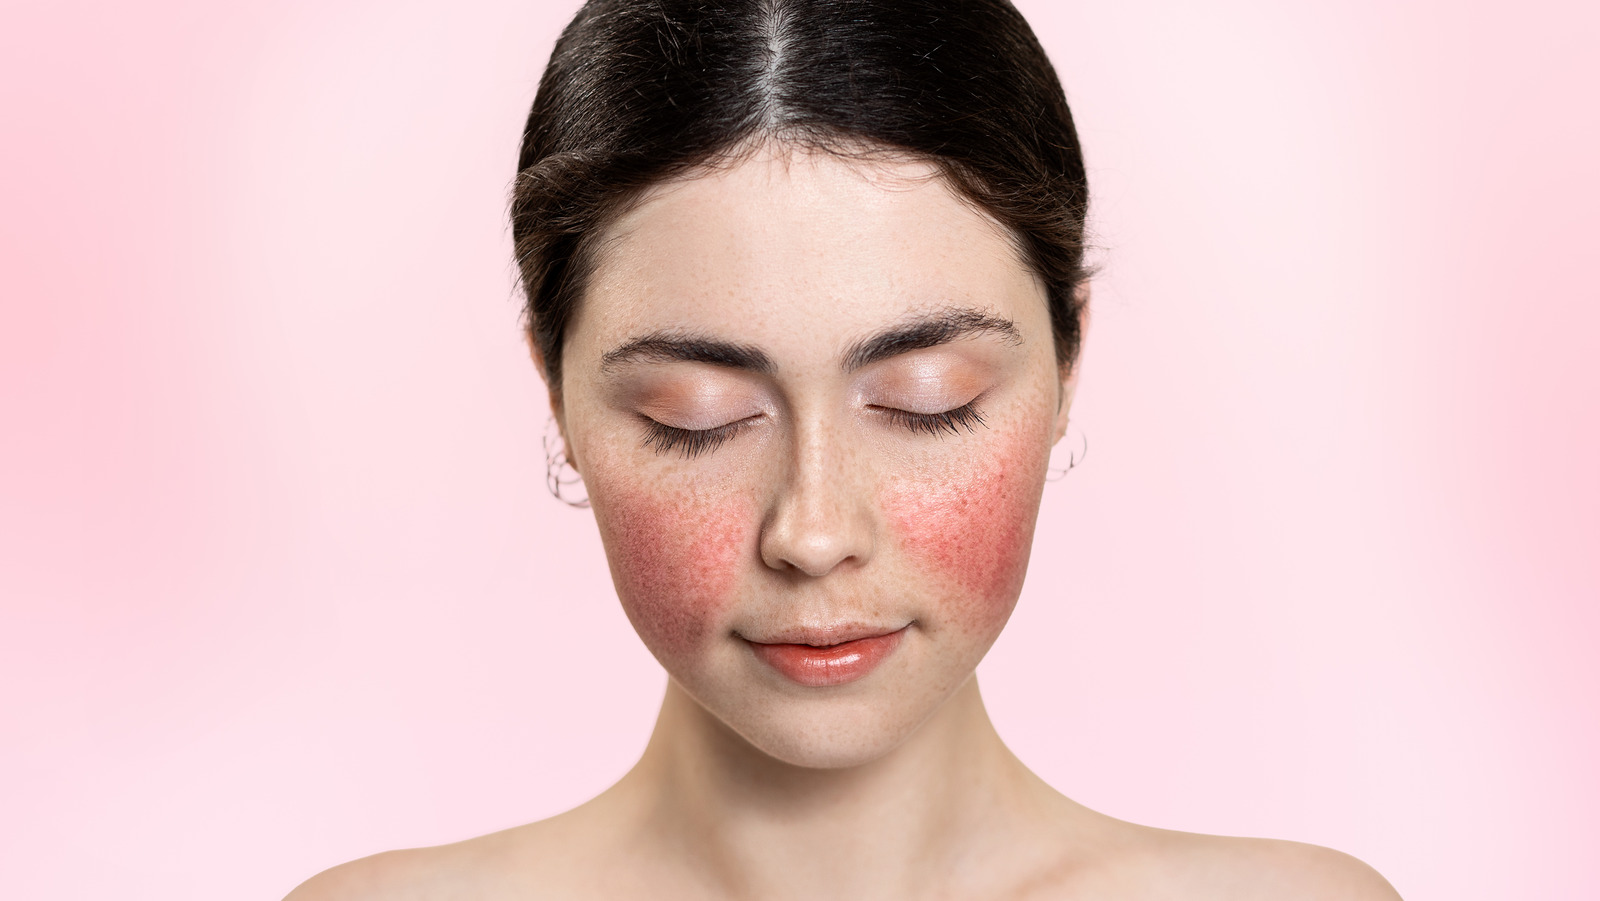 Lupus Butterfly Rash Why Do Patients With Lupus Develop Facial Rashes